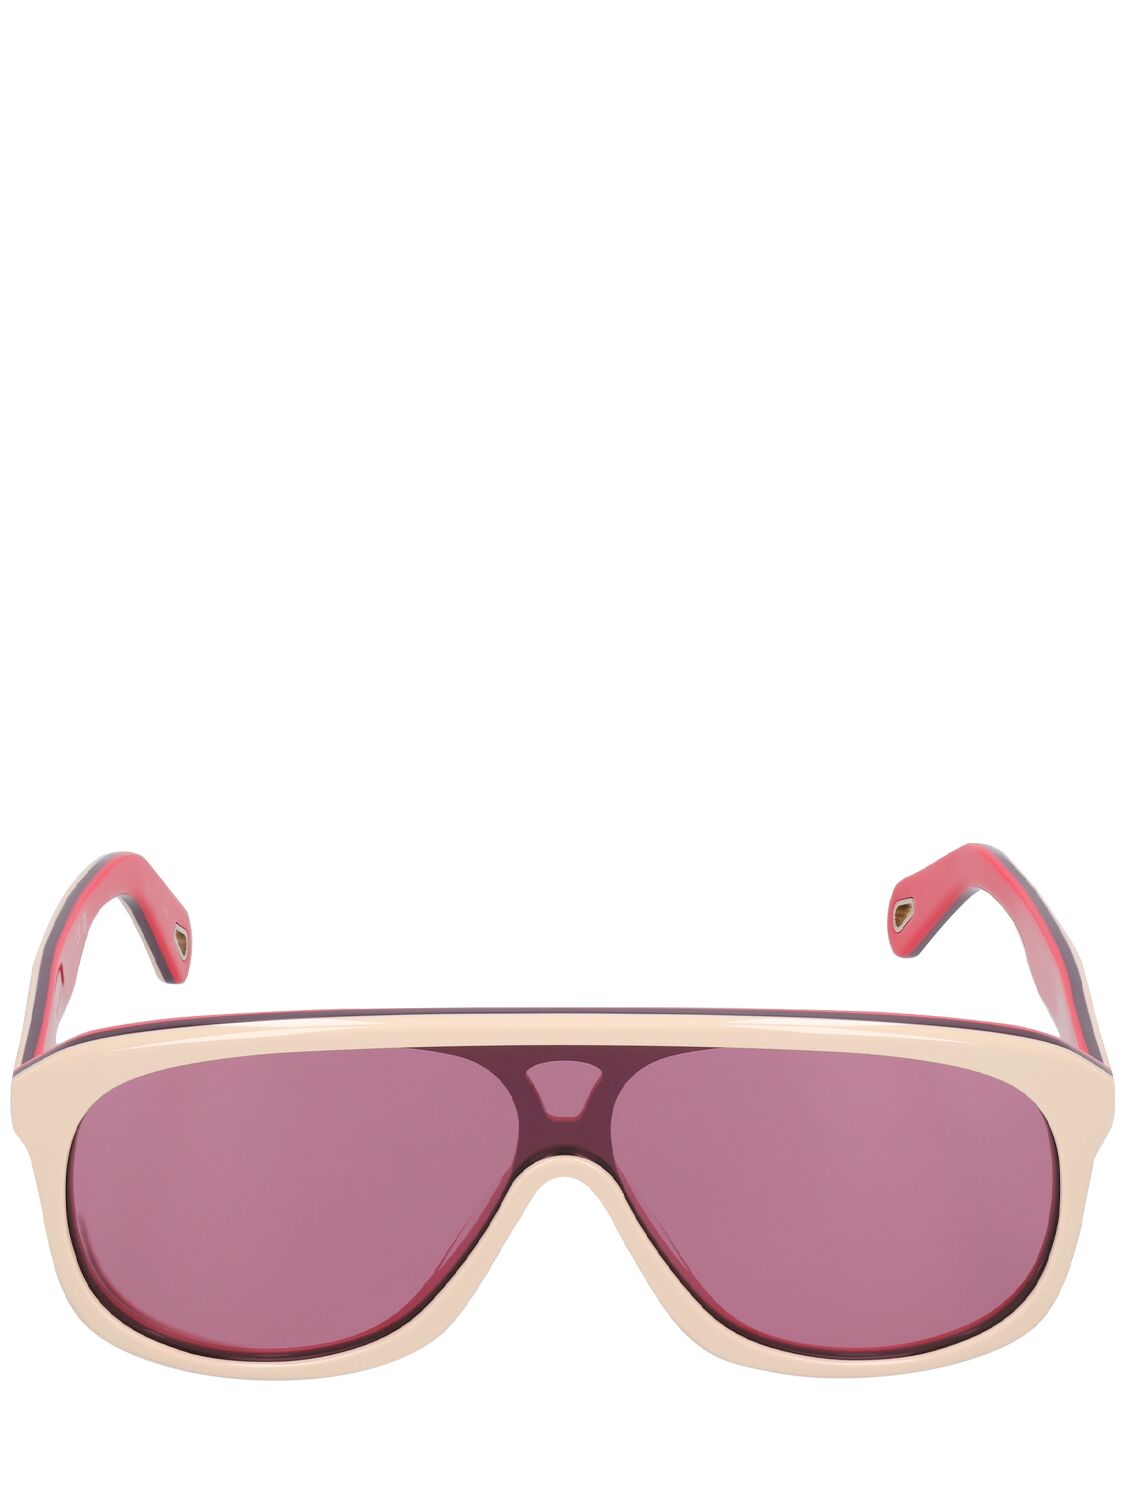 Chloé Mountaineering After Ski Sunglasses In Pink